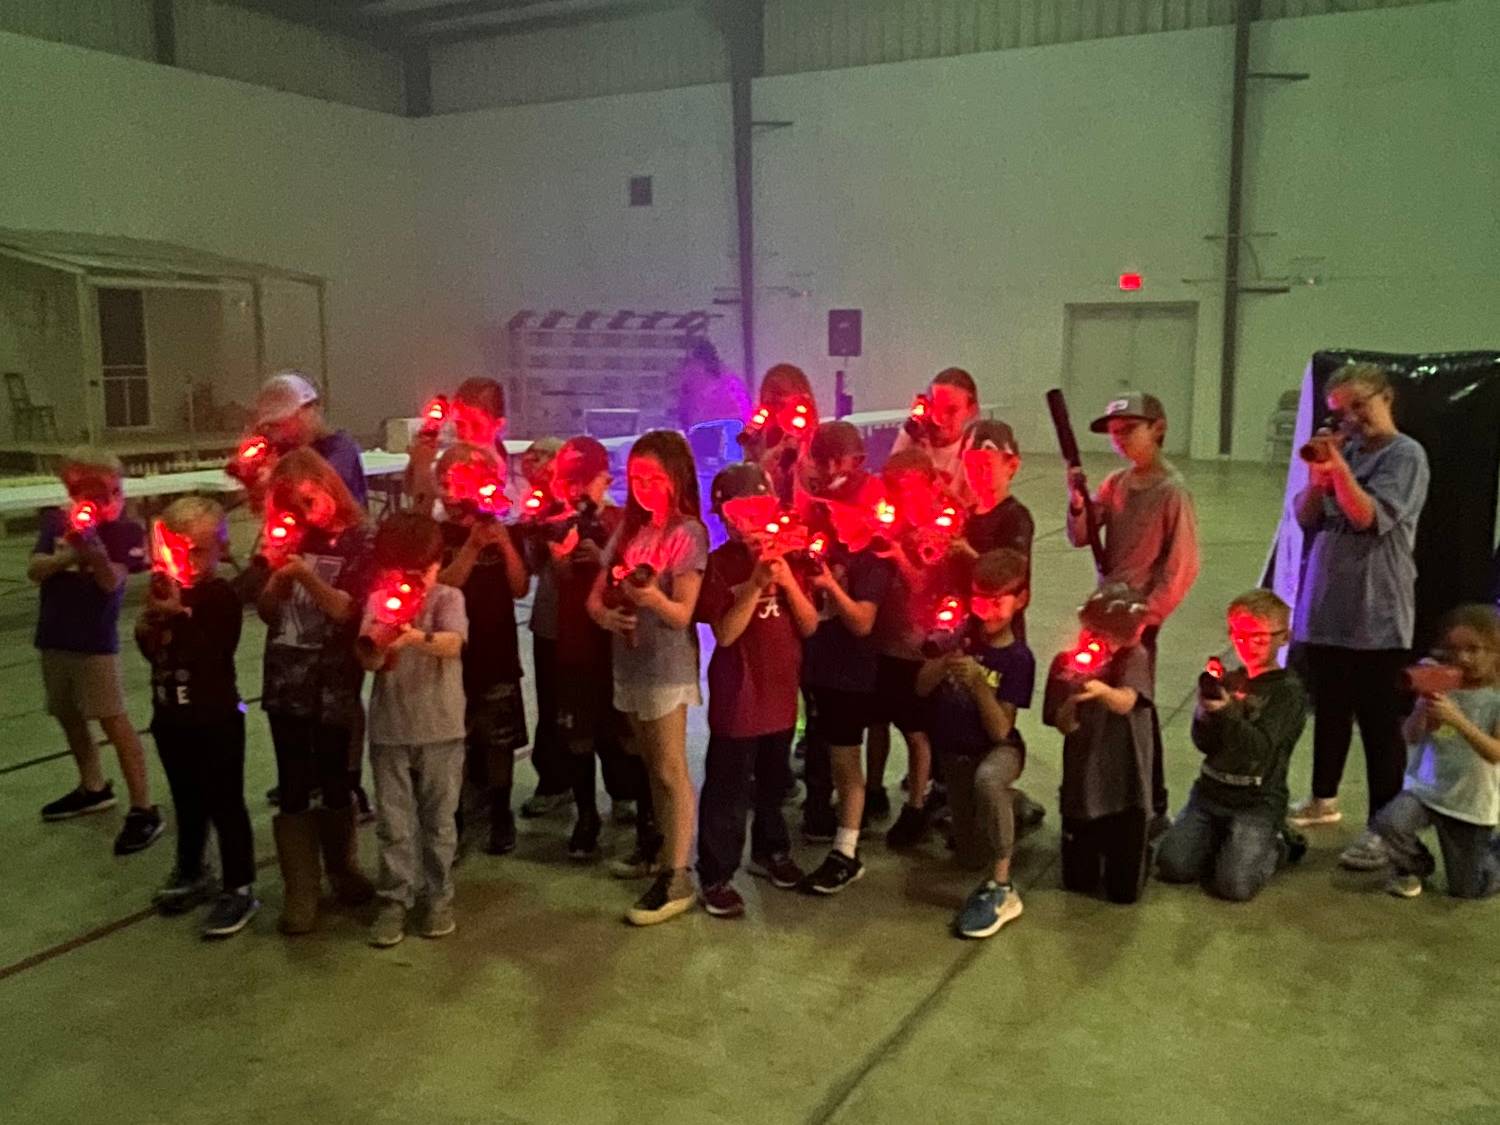 Xtreme Warrior Tag - Mobile Games Laser Tag Archery Tag in Alabama (2)